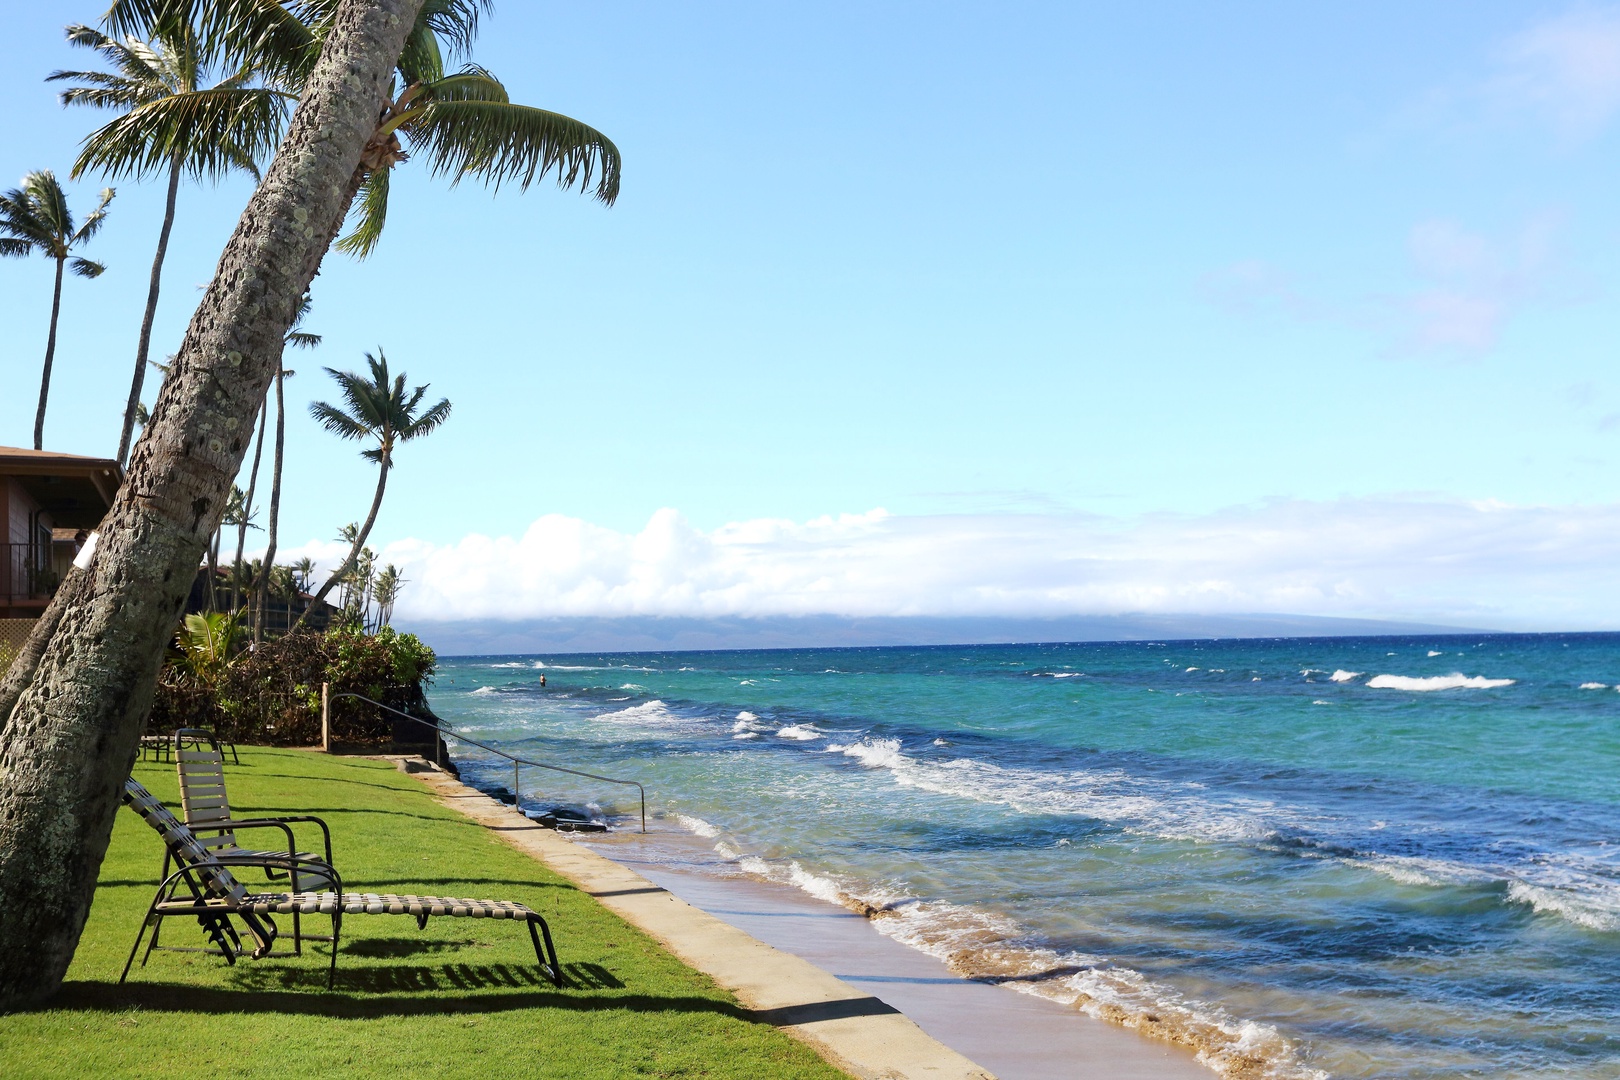 Lahaina Vacation Rentals, Paki Maui 313 - Sip your morning coffee from the grass watching turtles and waves roll in